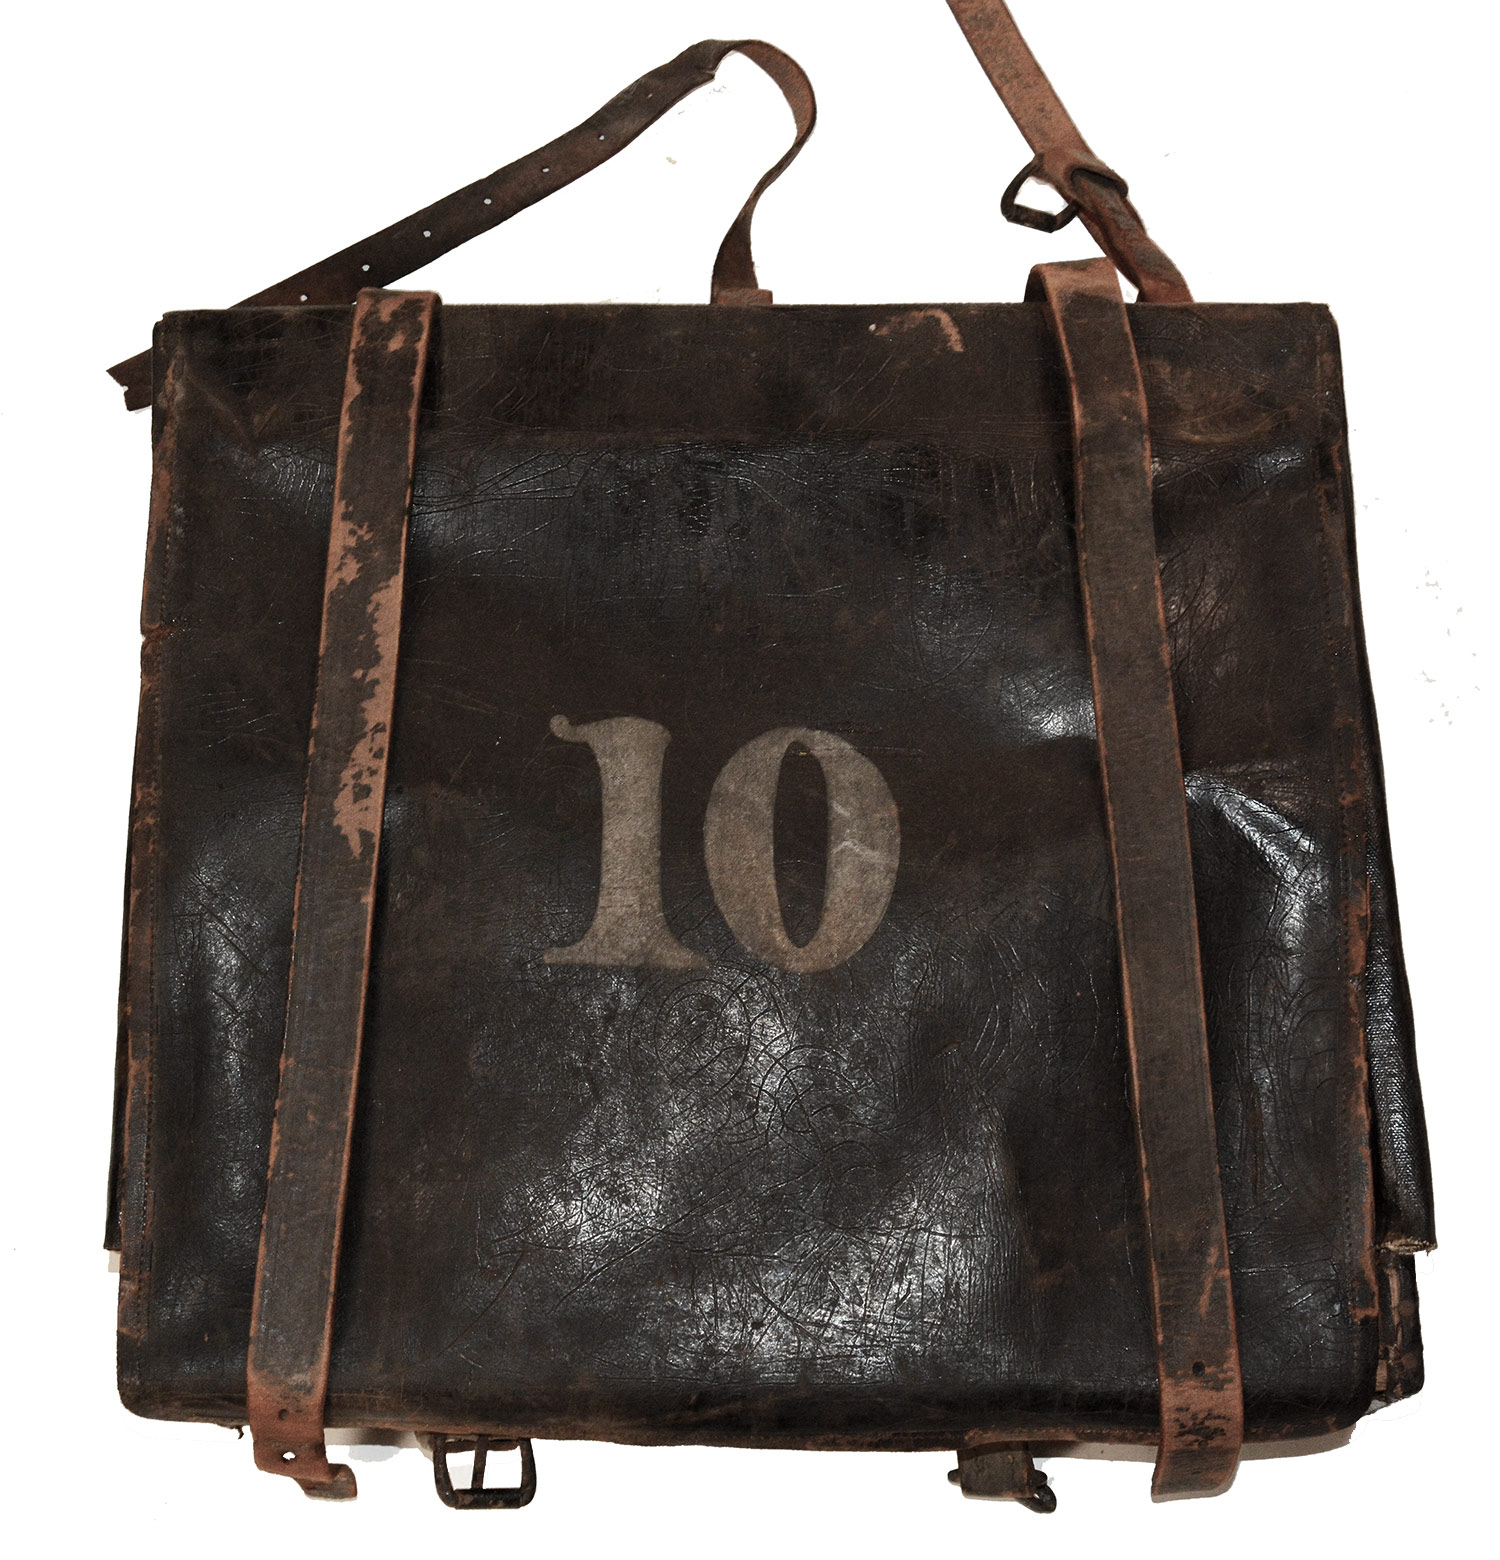 US BOX STYLE KNAPSACK WITH PAINTED NUMBER ON OUTER FLAP